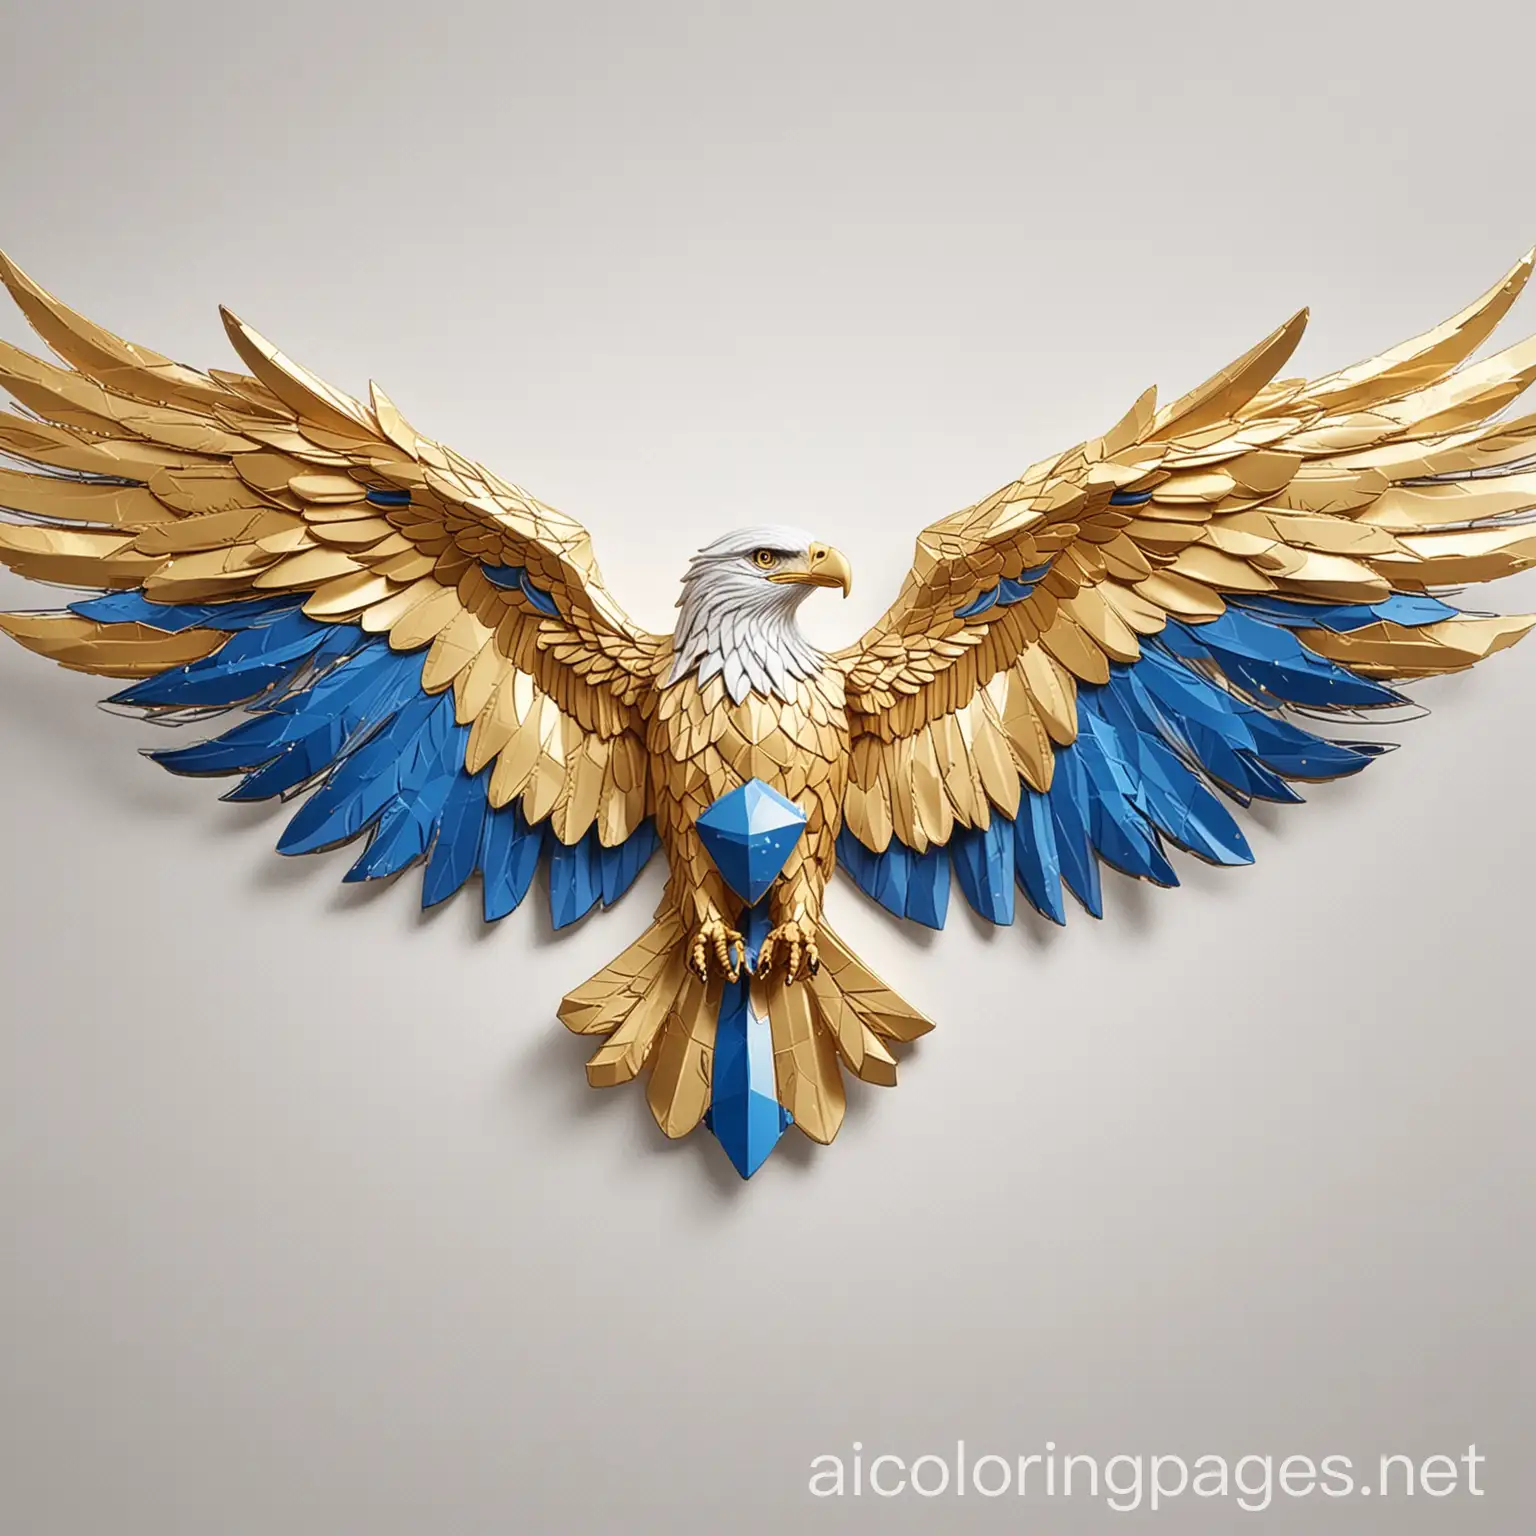 The image shows a logo consisting of an eagle designed in a geometric style with gold and blue colors, soaring with its wings spread. Below the eagle is the text "SPARKSWAY ADS" written in a clear font, with "SPARK" in gold and "SWAY ADS" in blue.Detailed description of the logo:1. **Eagle:**   - Geometric, polygonal design.   - Main colors: gold and blue.   - Detailed depiction of wings and tail, with wings spread as if in flight.   2. **Text:**   - **SPARKSWAY ADS**   - "SPARK" in gold.   - "SWAY ADS" in blue.   - The font used is simple and clear.To create a similar image using AI, you can use this description to set the inputs for the AI to generate a new image that includes the same basic elements and details., Coloring Page, black and white, line art, white background, Simplicity, Ample White Space. The background of the coloring page is plain white to make it easy for young children to color within the lines. The outlines of all the subjects are easy to distinguish, making it simple for kids to color without too much difficulty